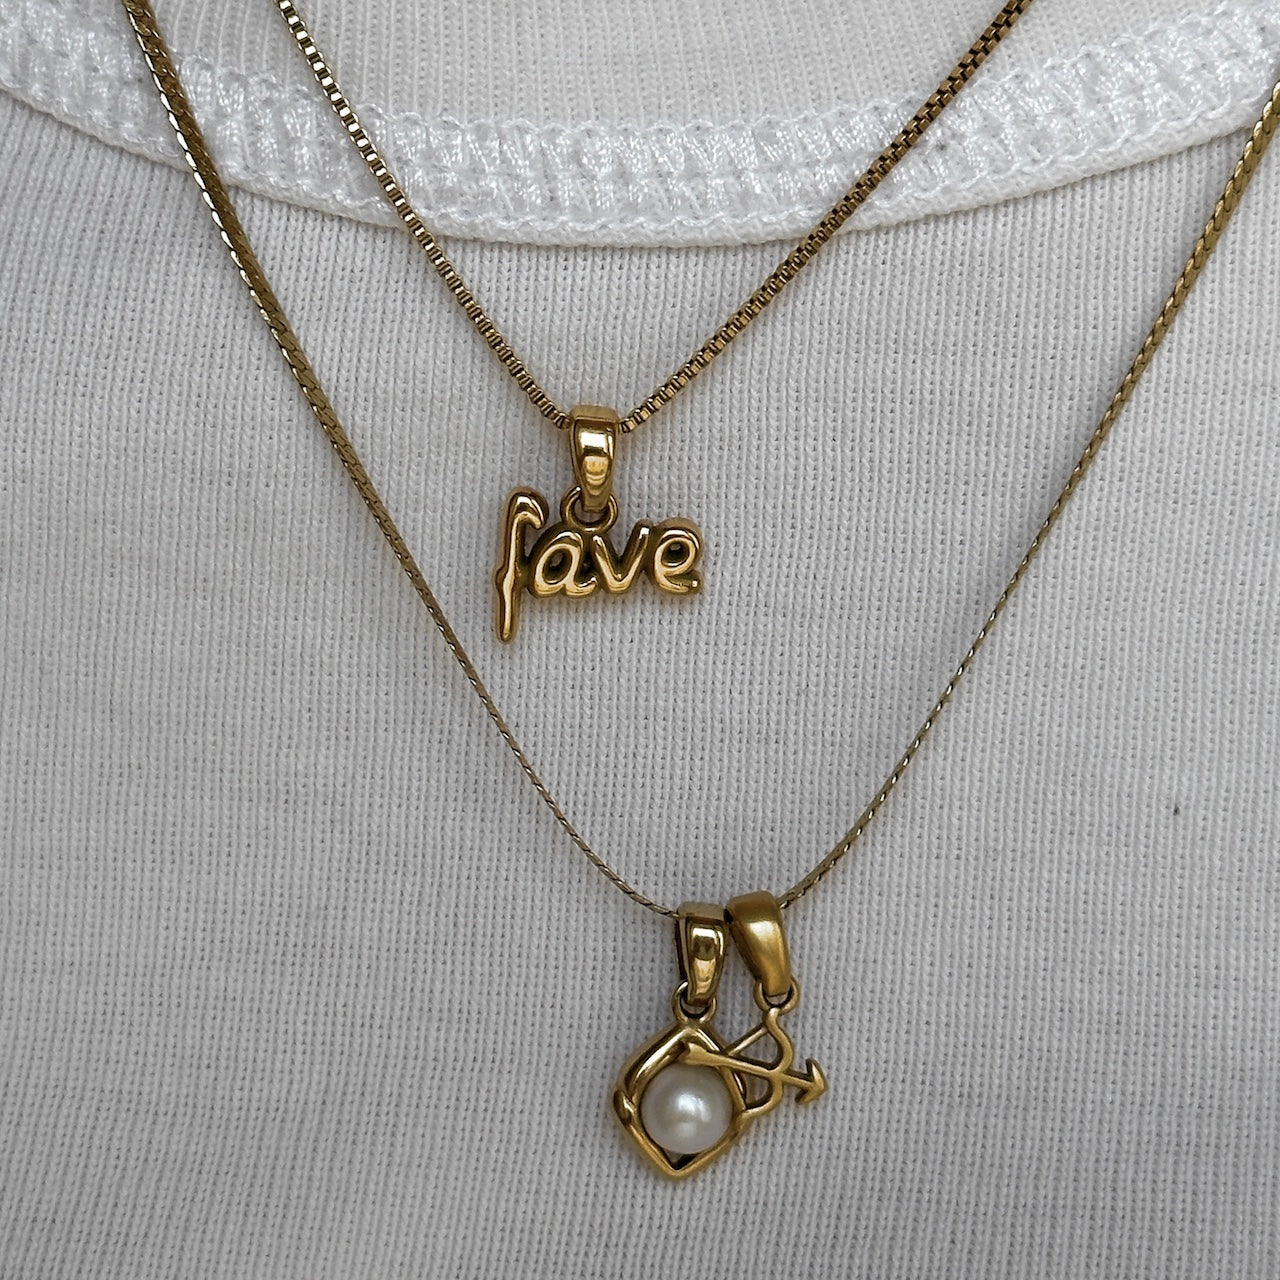 'You're my fave' Necklace